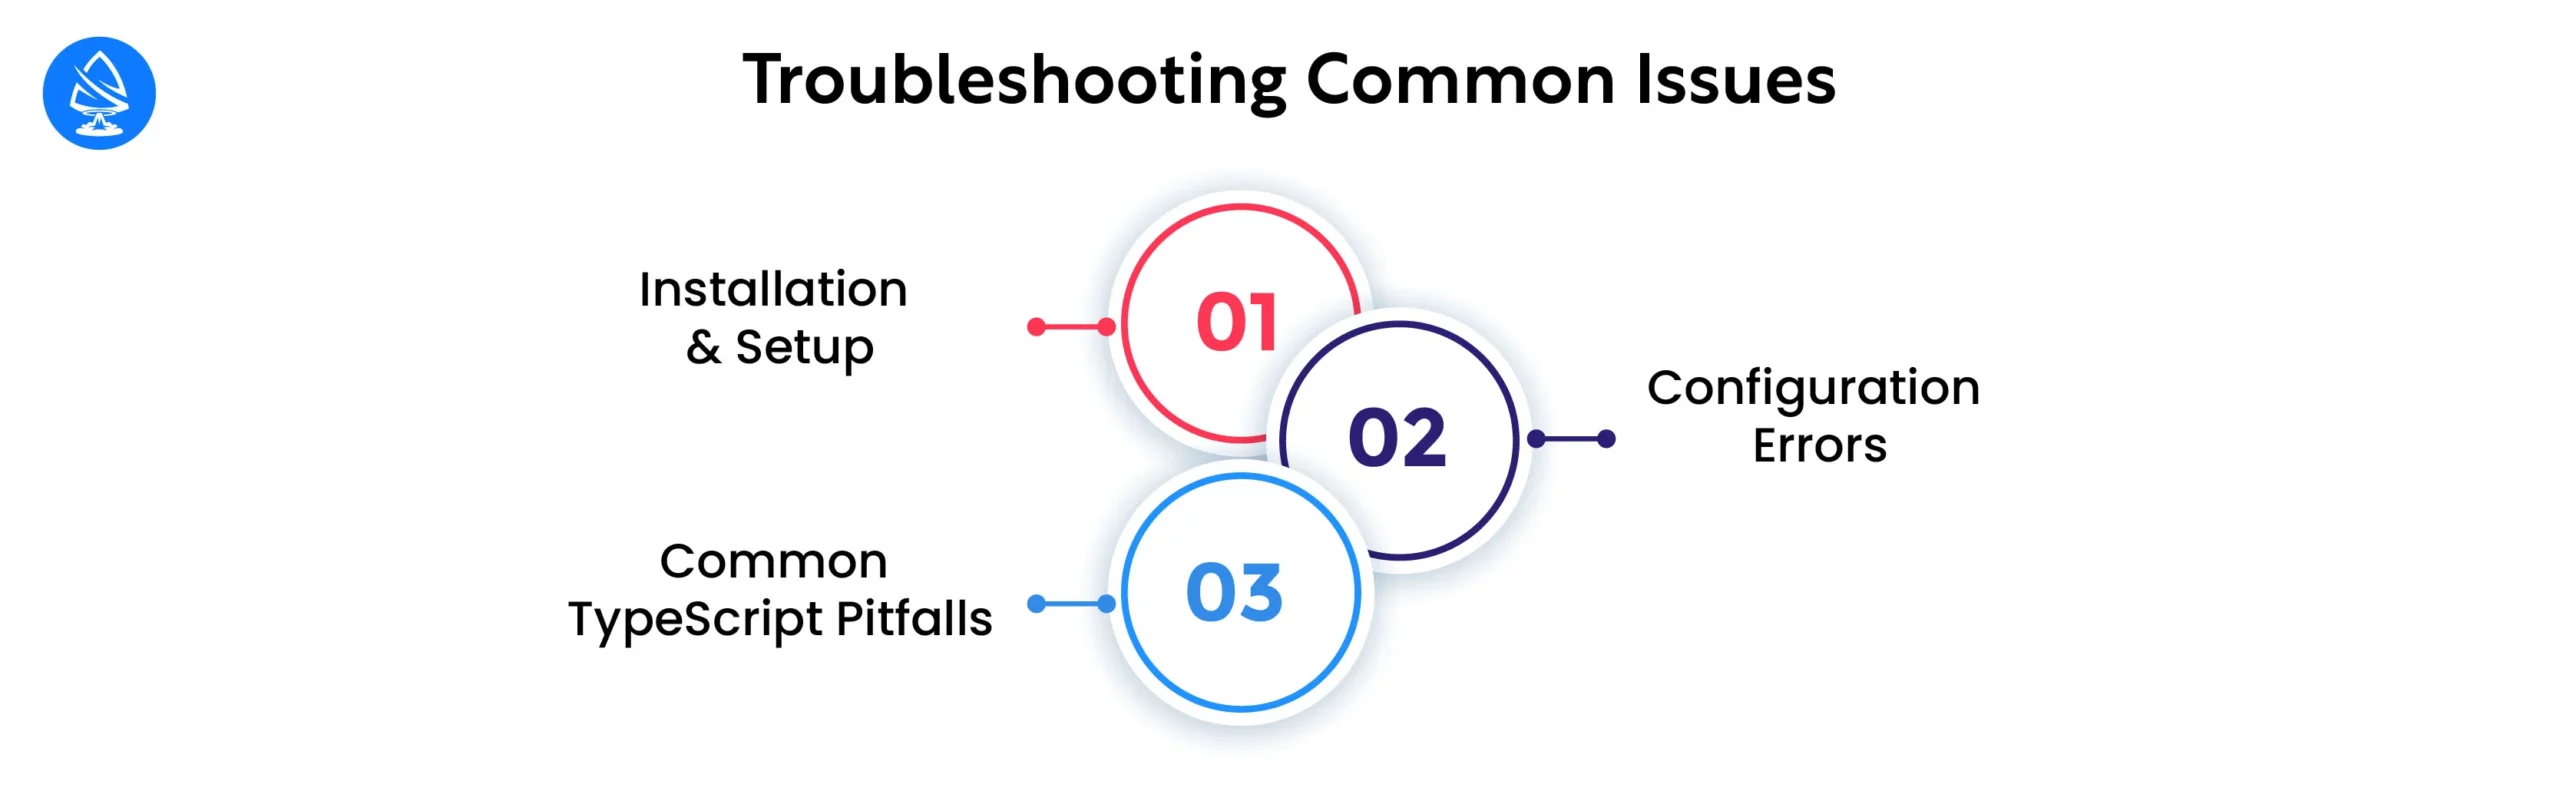 Troubleshooting Common Issues 